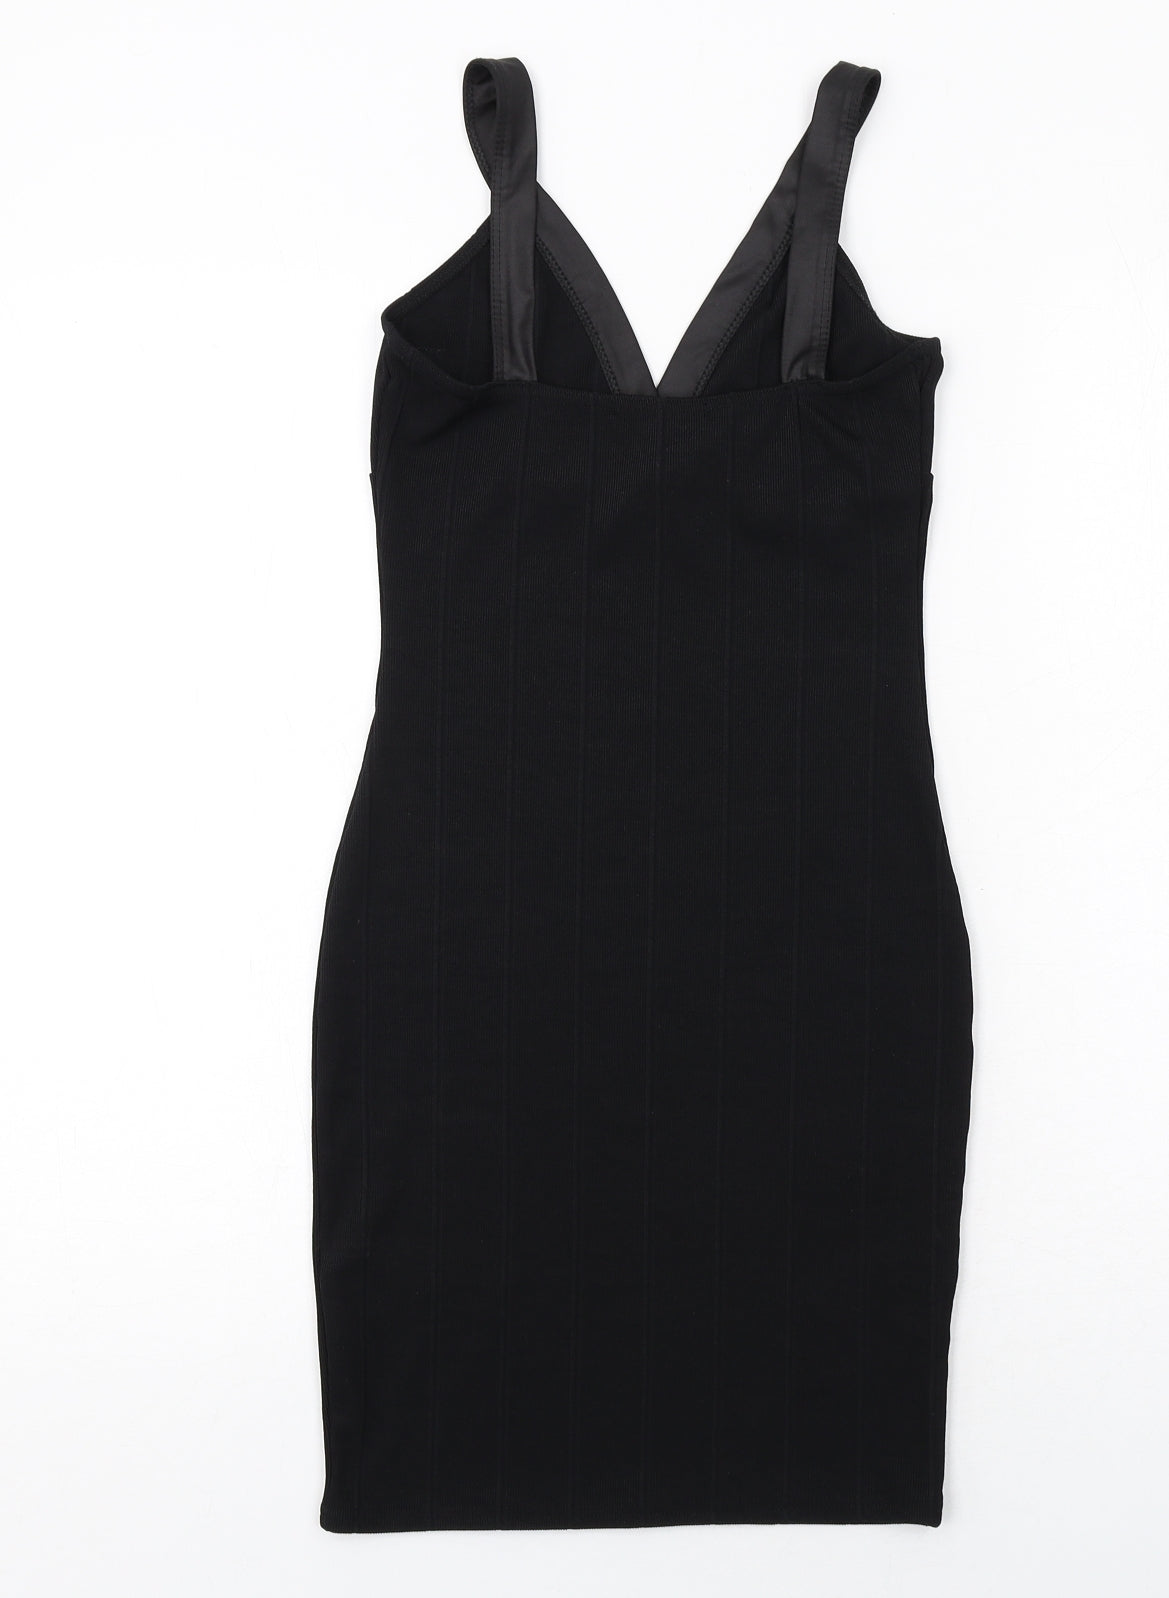 Missguided Womens Black Polyester Pencil Dress Size 8 V-Neck Pullover